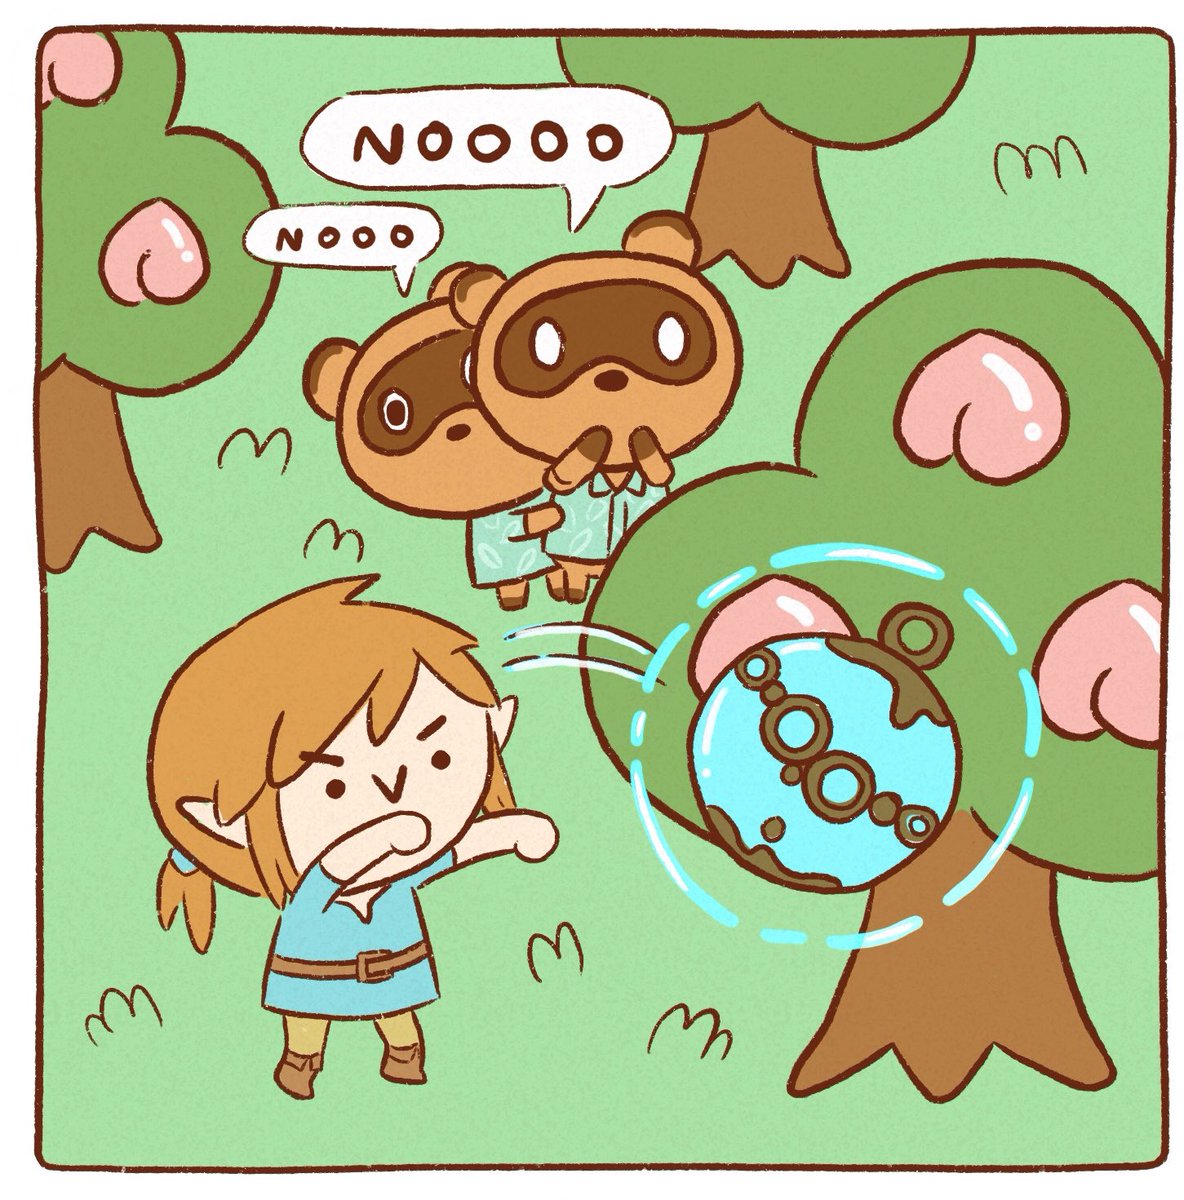 A comic about Link's deserted island stay ?? #acnh #AnimalCrossingNewHorizons 